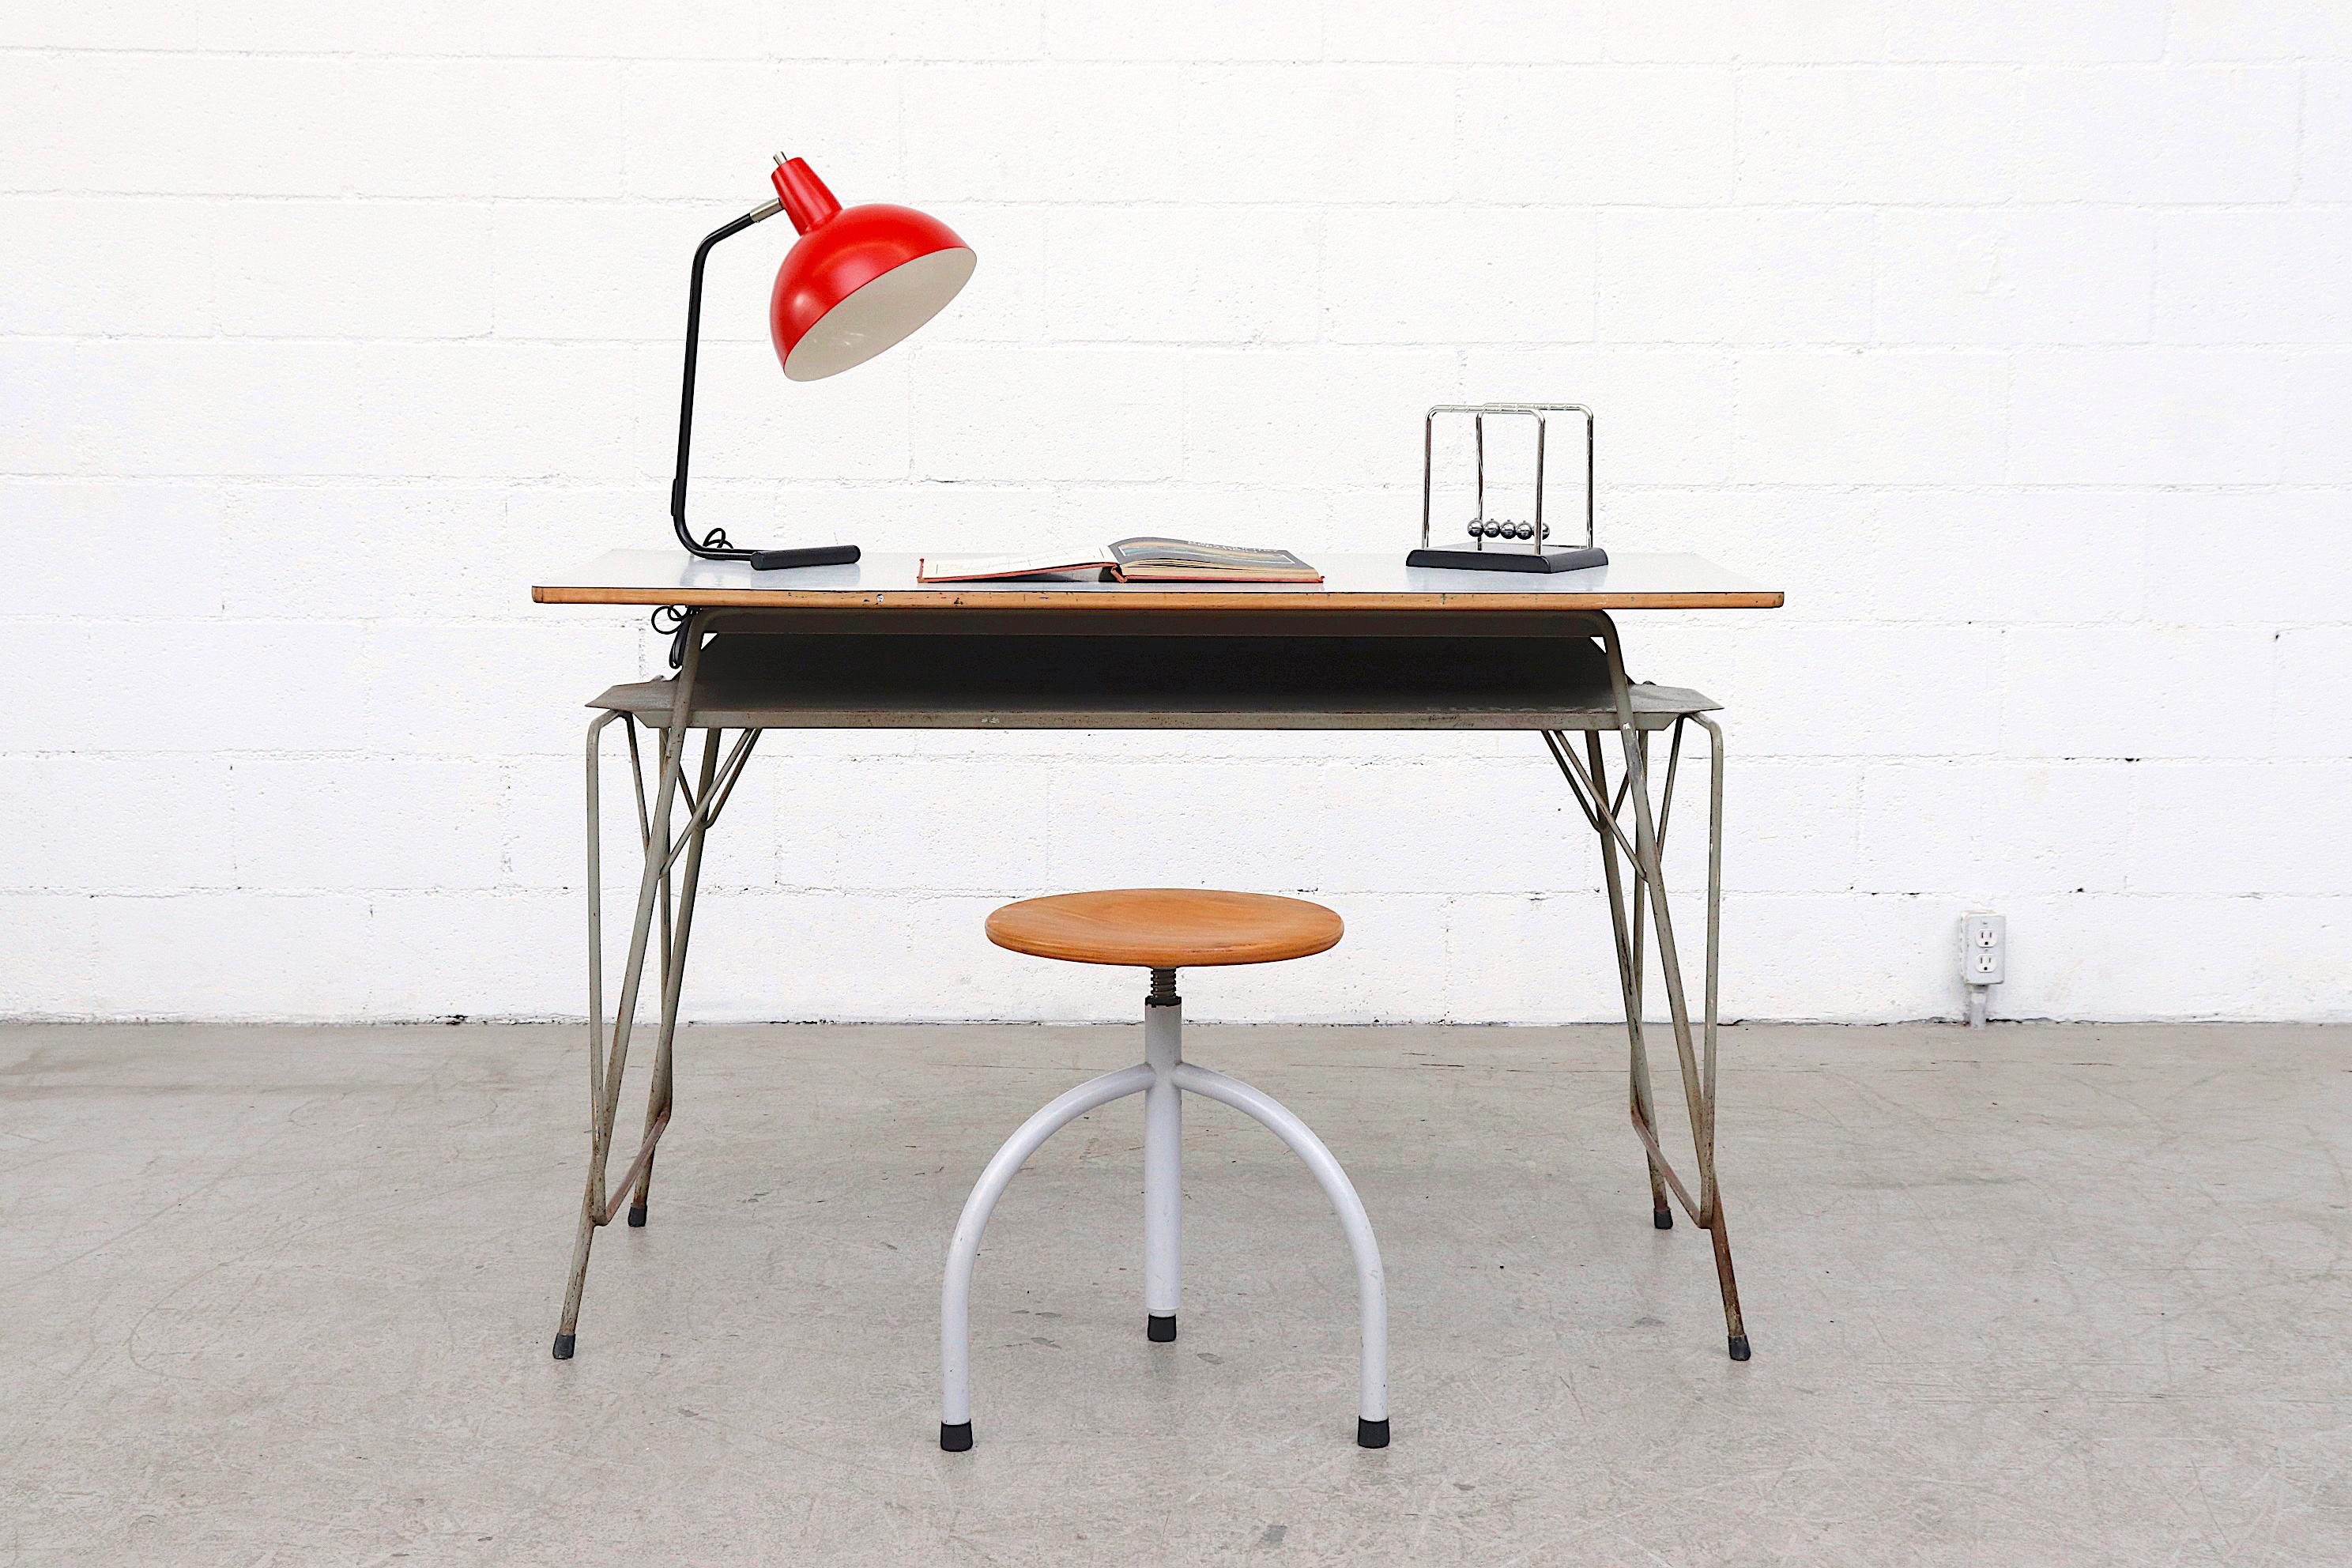 Midcentury Willy Van Der Meeren industrial desk with printed Formica top and taupe enameled tubular metal frame. In original condition with visible wear and scratching. Wear is consistent with its age and use. This one has prominent graffiti ELENA,